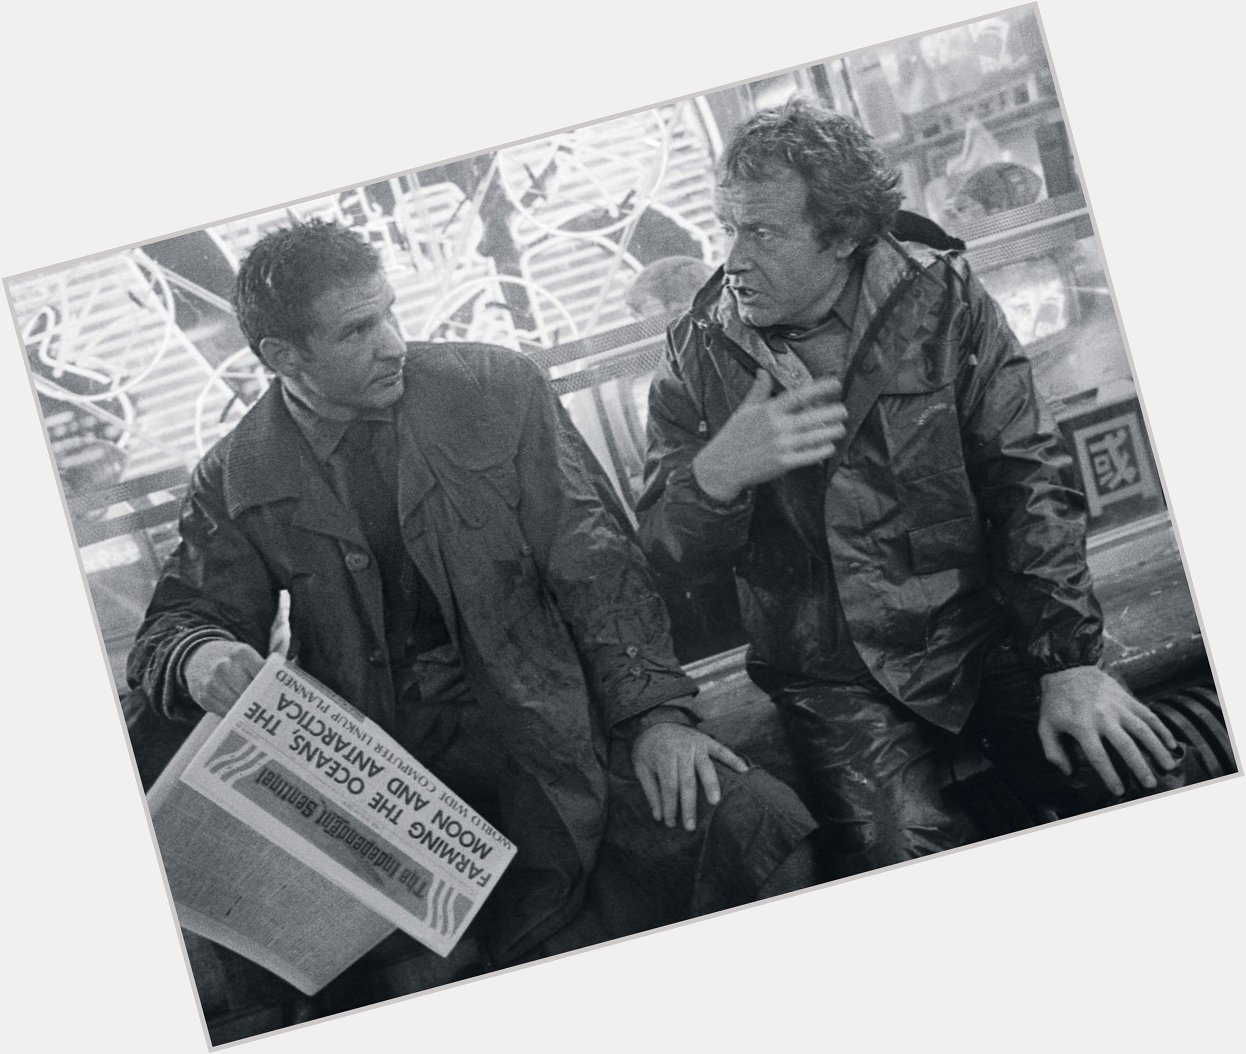 Happy 78th birthday to Sir Ridley Scott, who directed ATG films \"Blade Runner\" and \"Gladiator.\" 